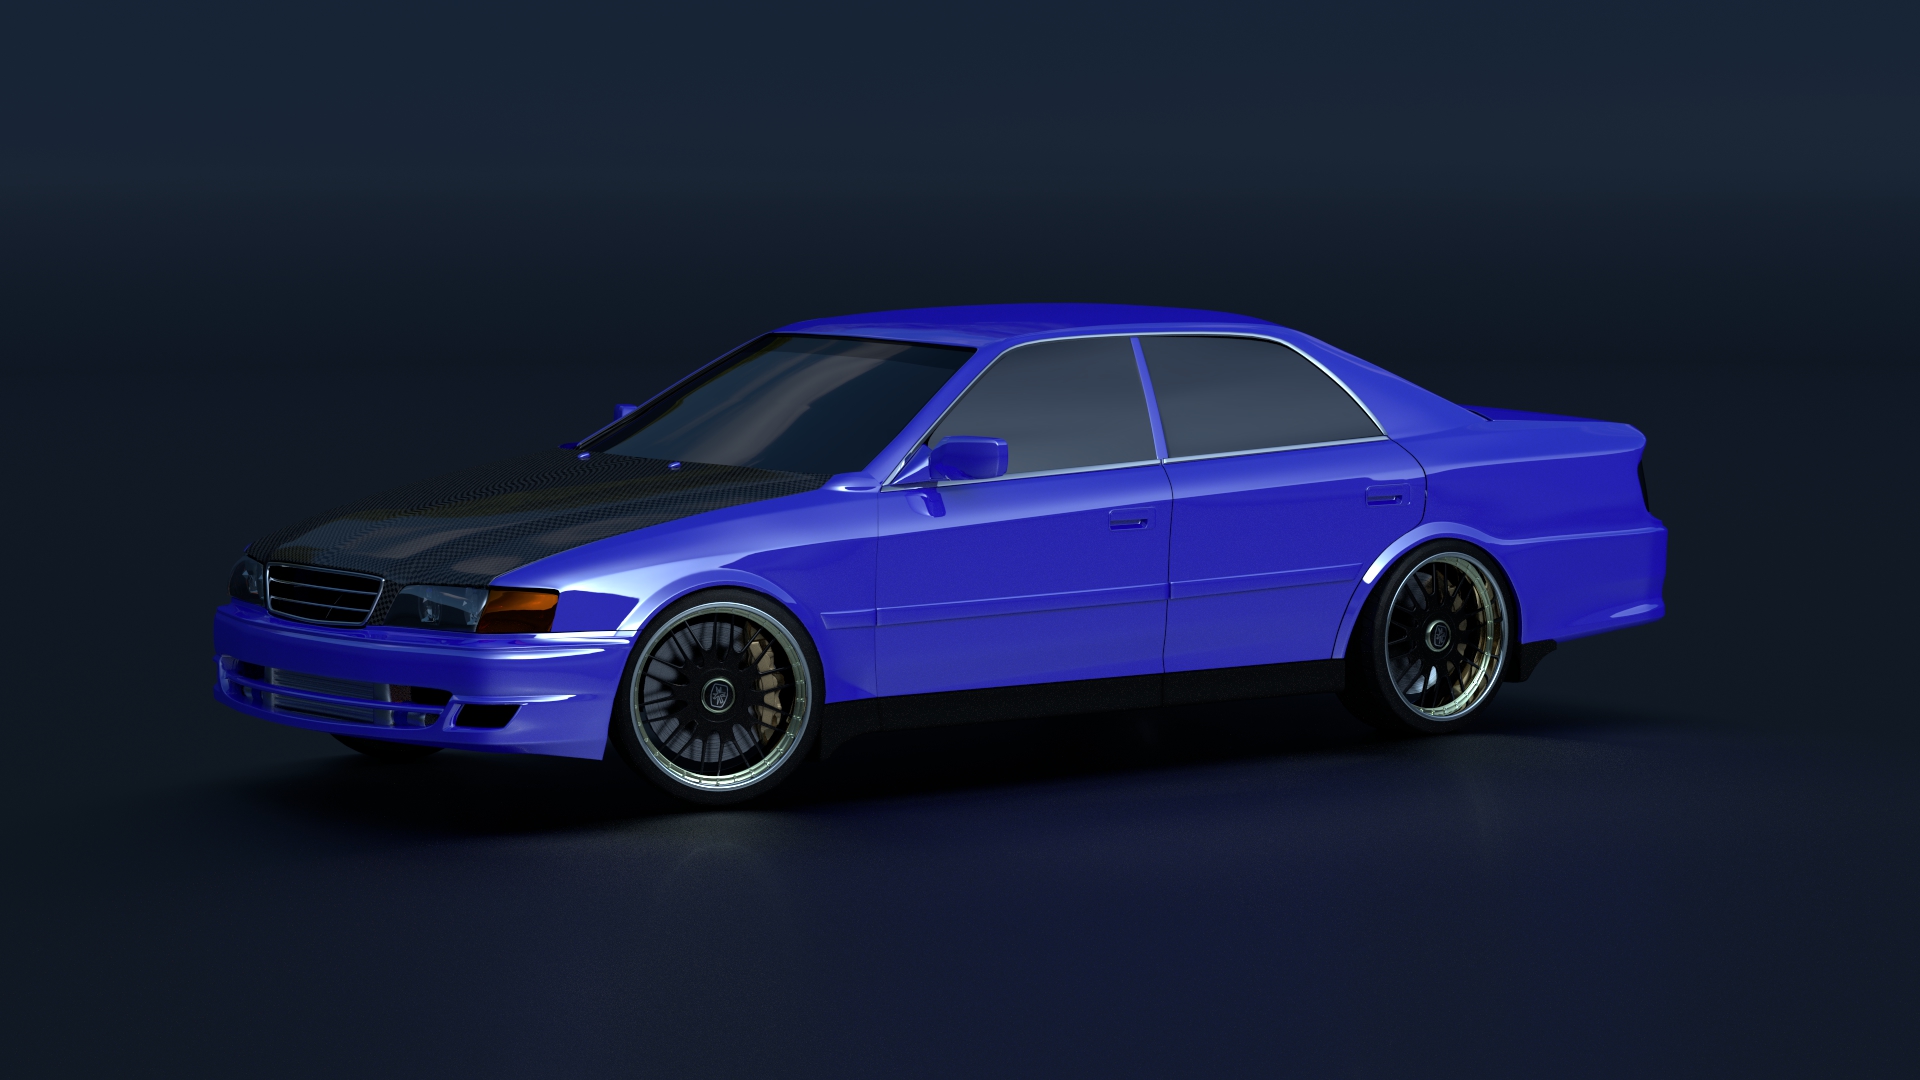 Toyota Chaser Jzx100 Wip First Car Attempt Ever Works In Progress Blender Artists Community